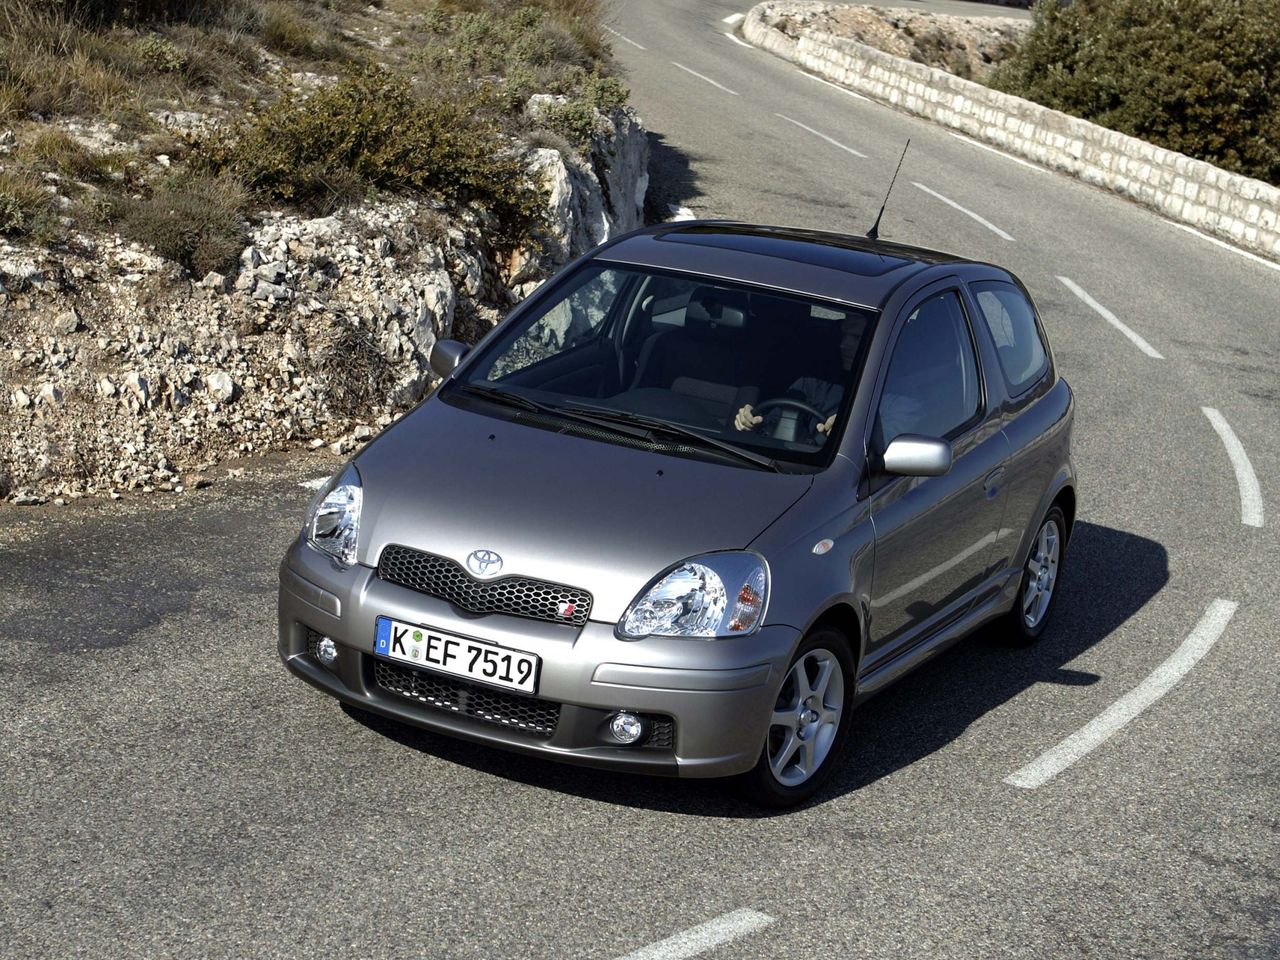 Toyota Yaris TS is the only variant of the first generation worth paying more than 10 thousand PLN for.